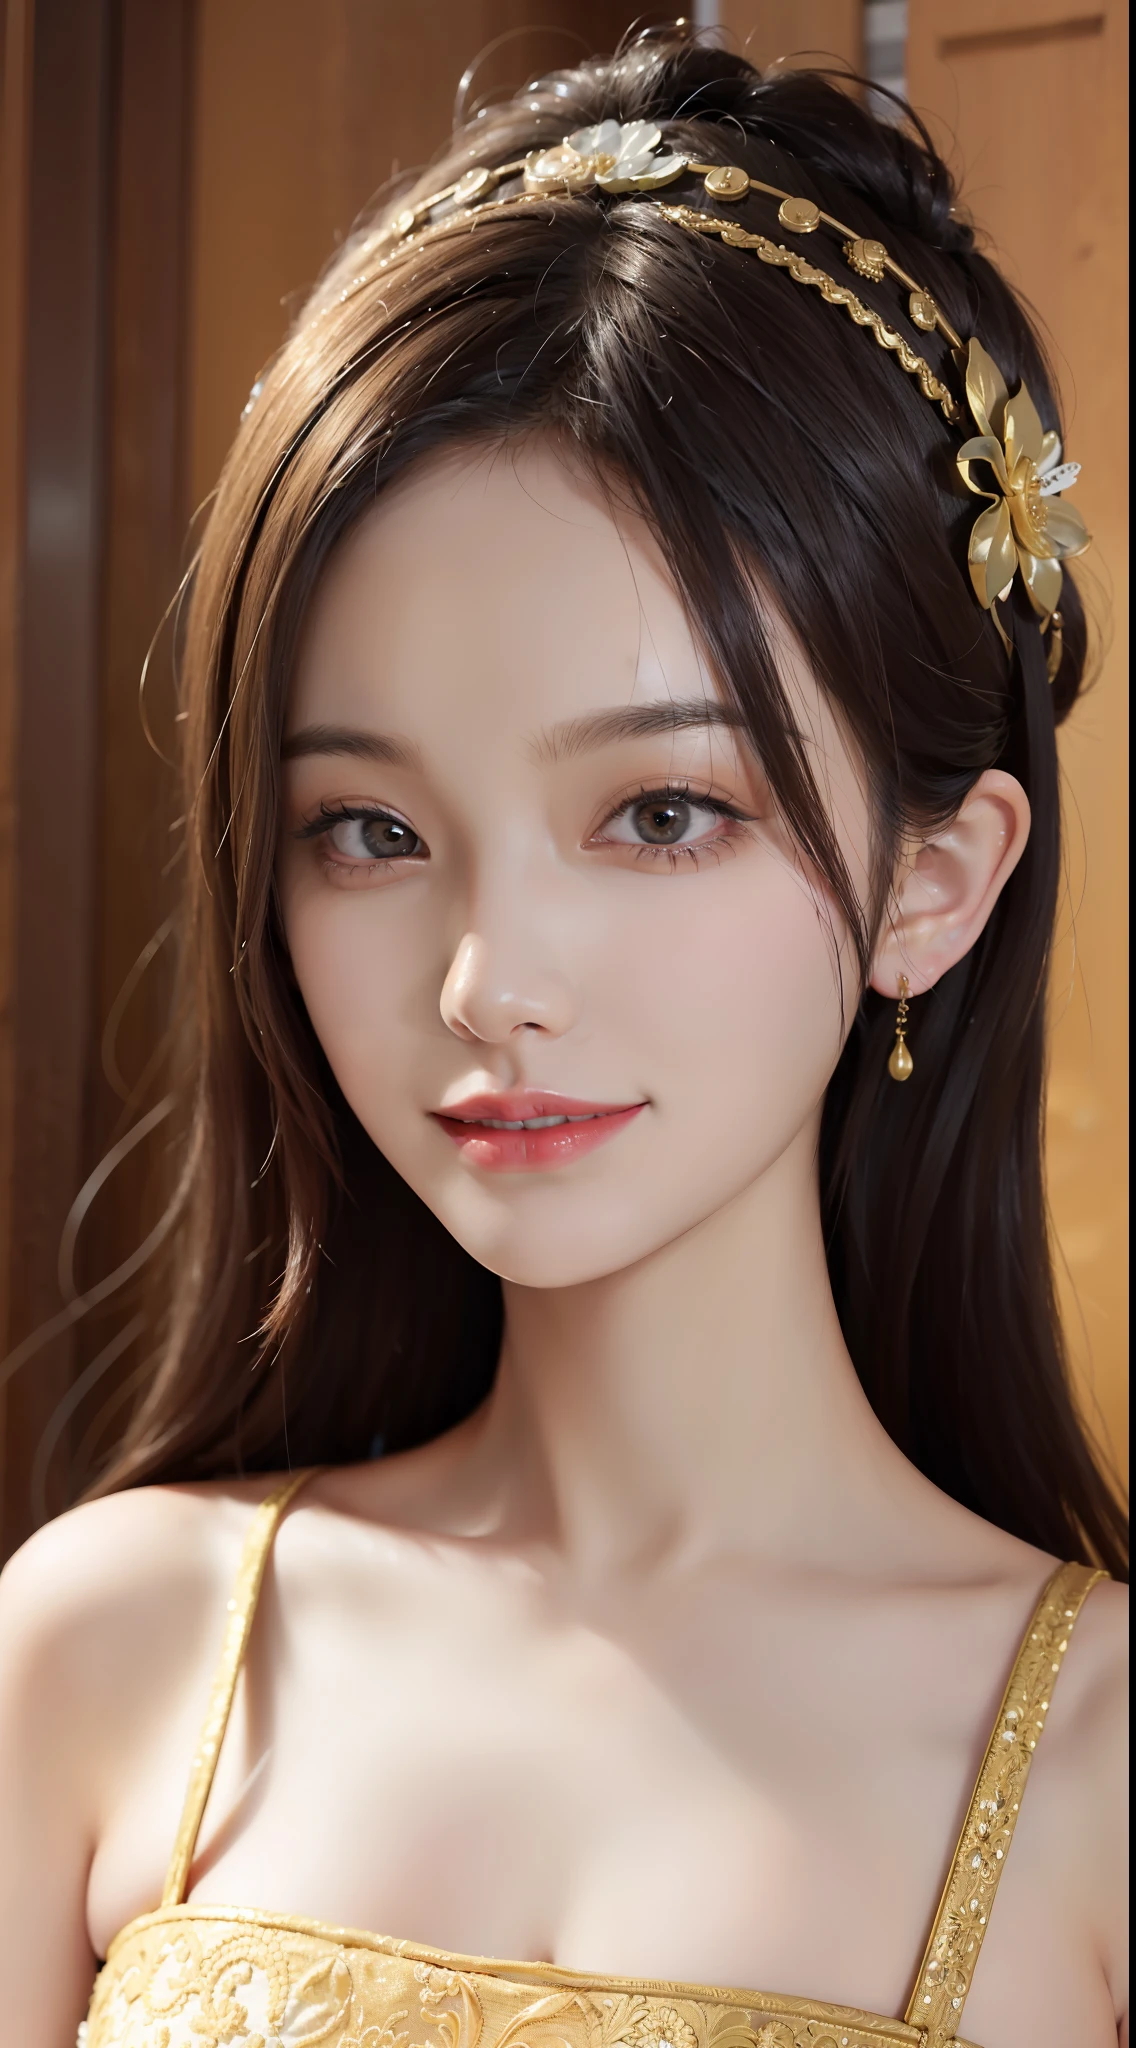 Masterpiece, Best Quality, Portrait of 1girl,Korean woman,(Masterpiece, Pretty person,Polluted smile),Virtual YouTube,Detailed skin texture, Detailed cloth texture, Beautifully detailed face, Masterpiece, Clavicle,